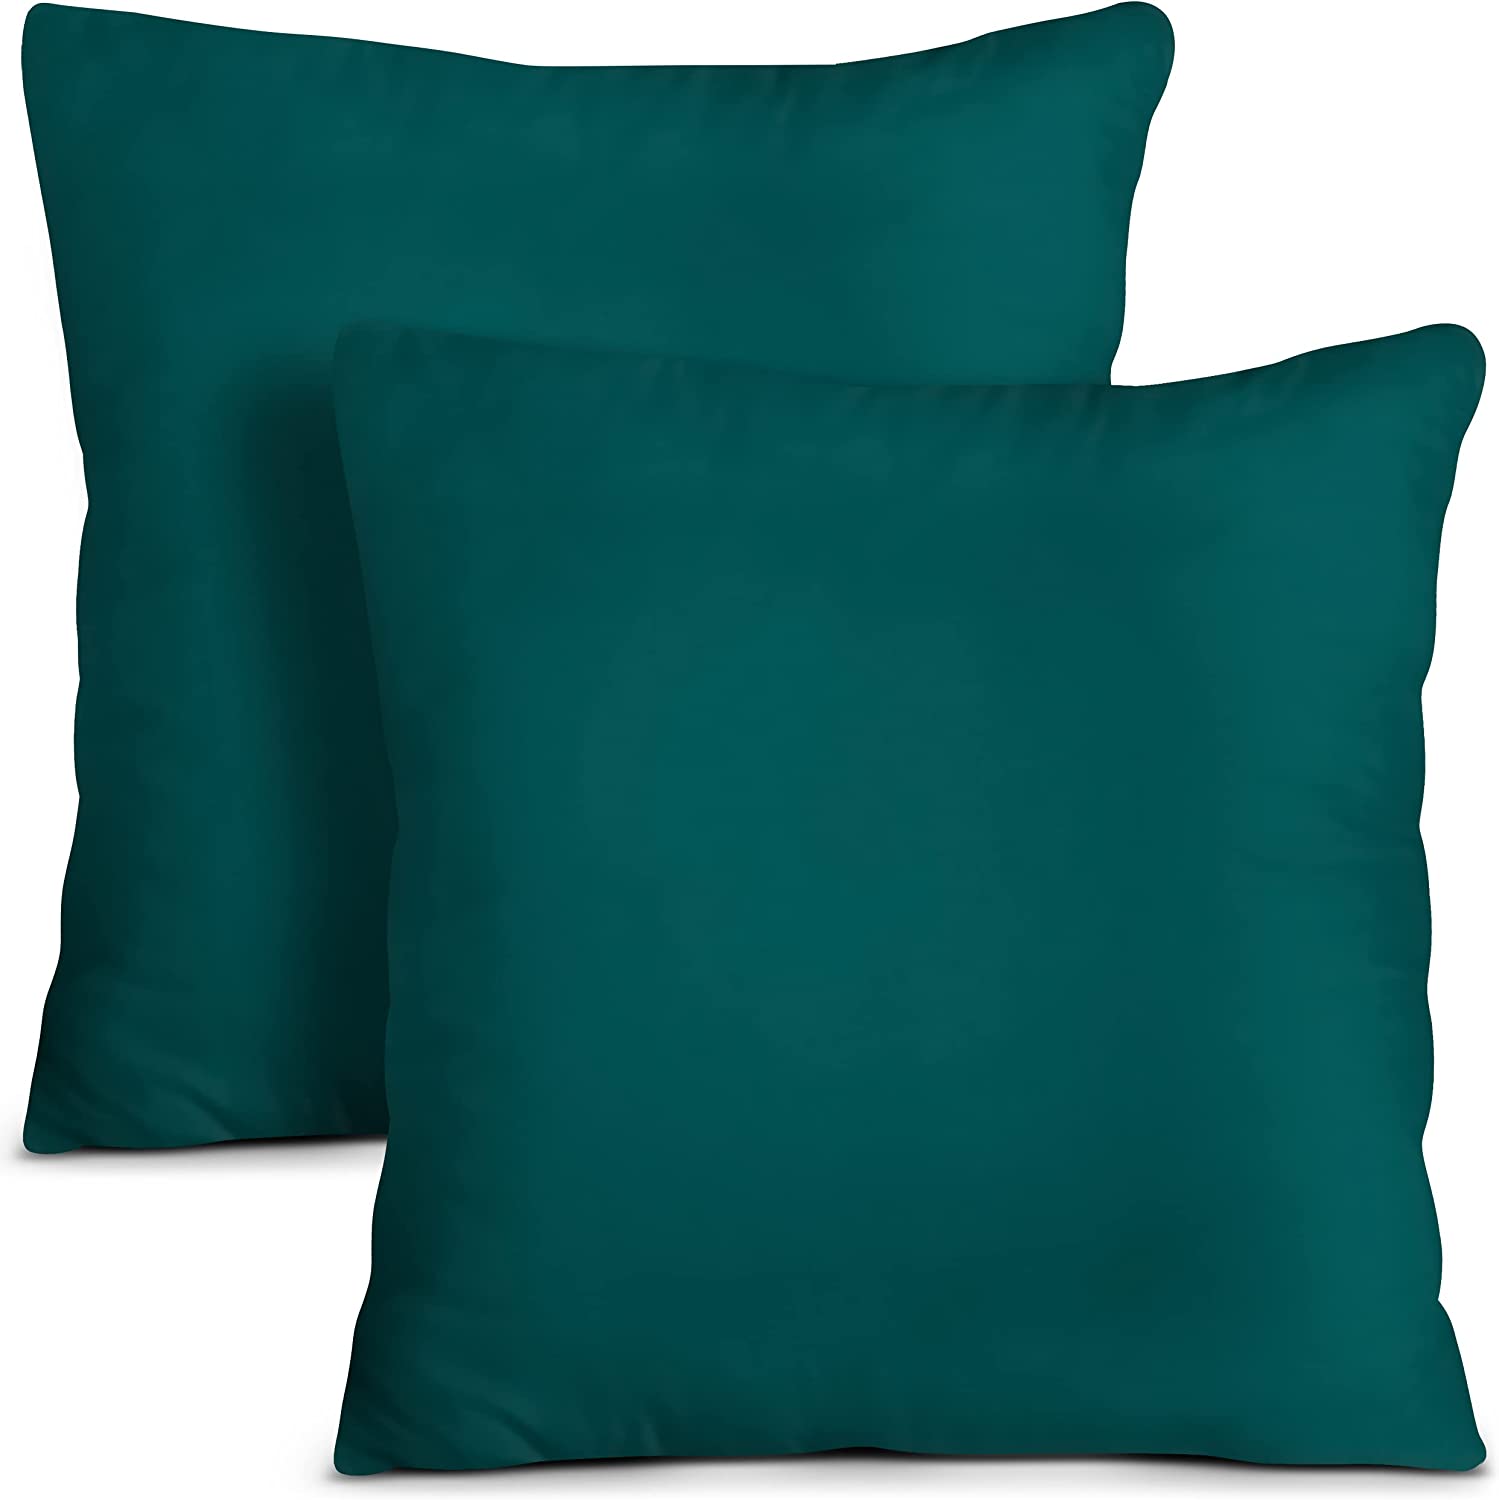 Utopia Bedding Throw Pillows Insert (Pack of 2, Black) - 18 x 18 Inches Bed  and Couch Pillows - Indoor Decorative Pillows